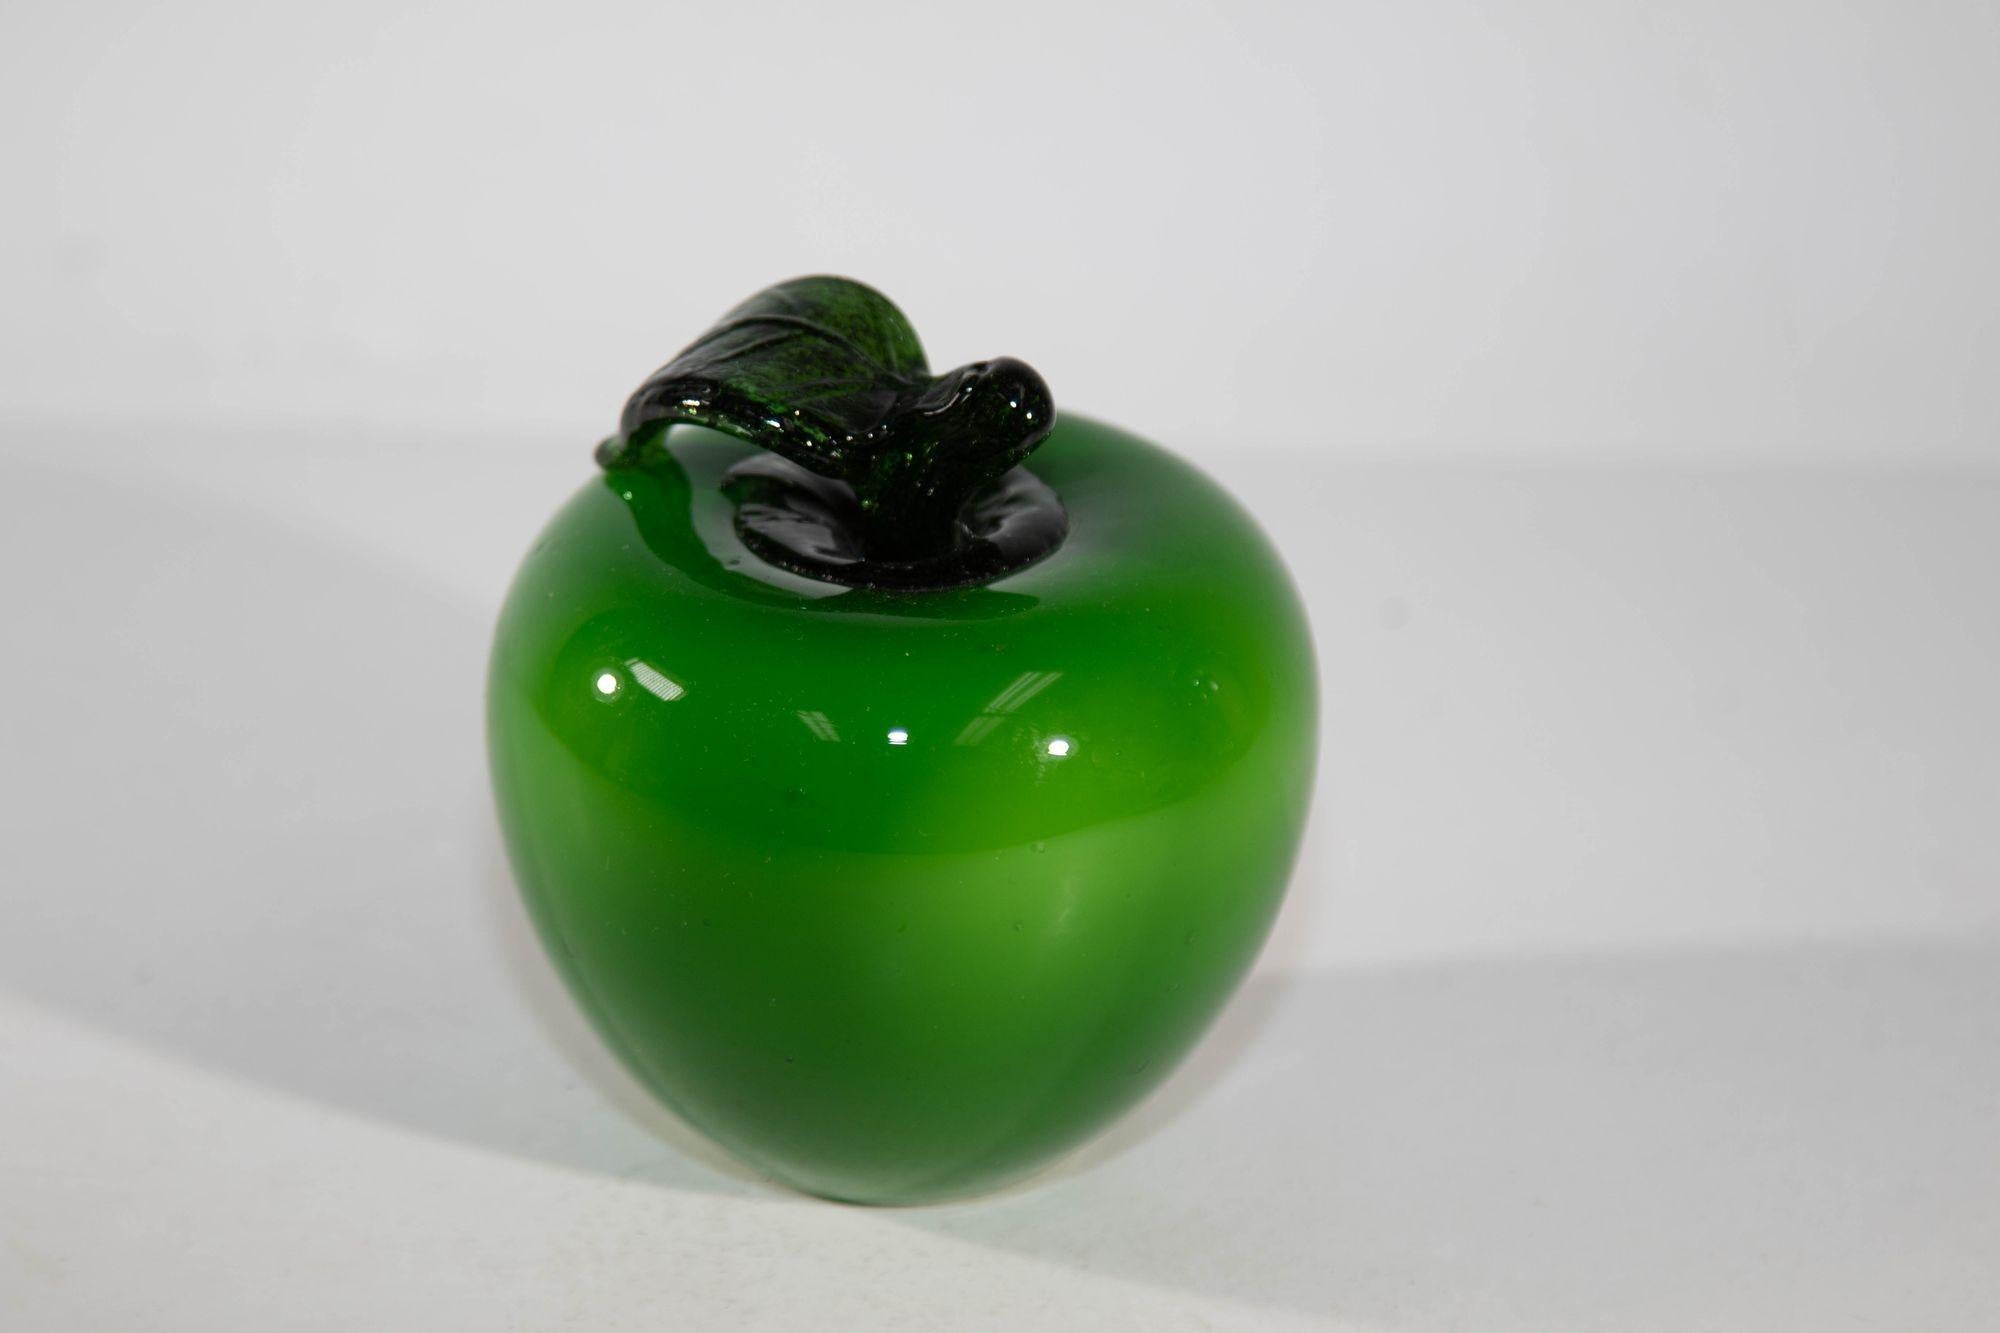 vintage glass apple paperweight